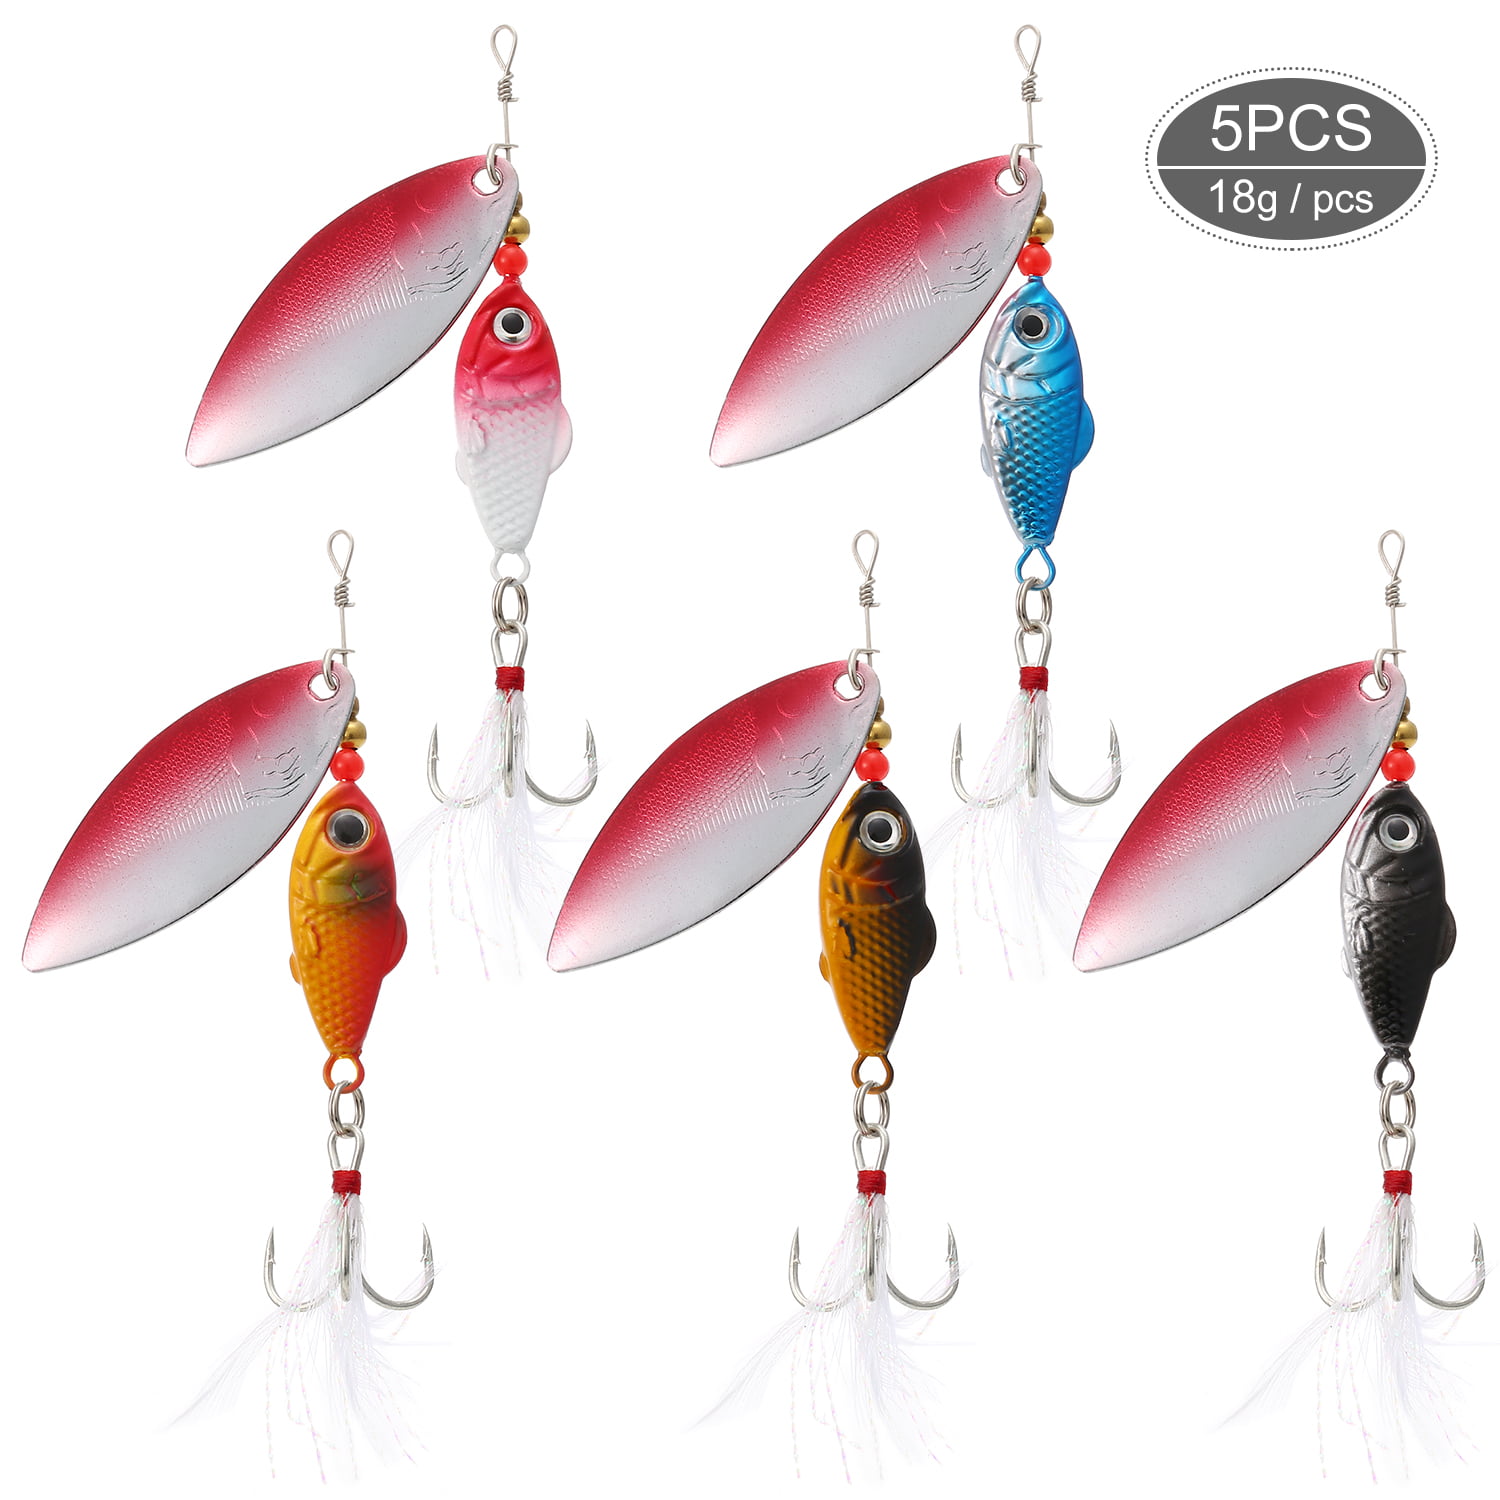 5X Head Hook with Spinner Spoon Fish Jig Head Soft Bait for Bass Fishing 